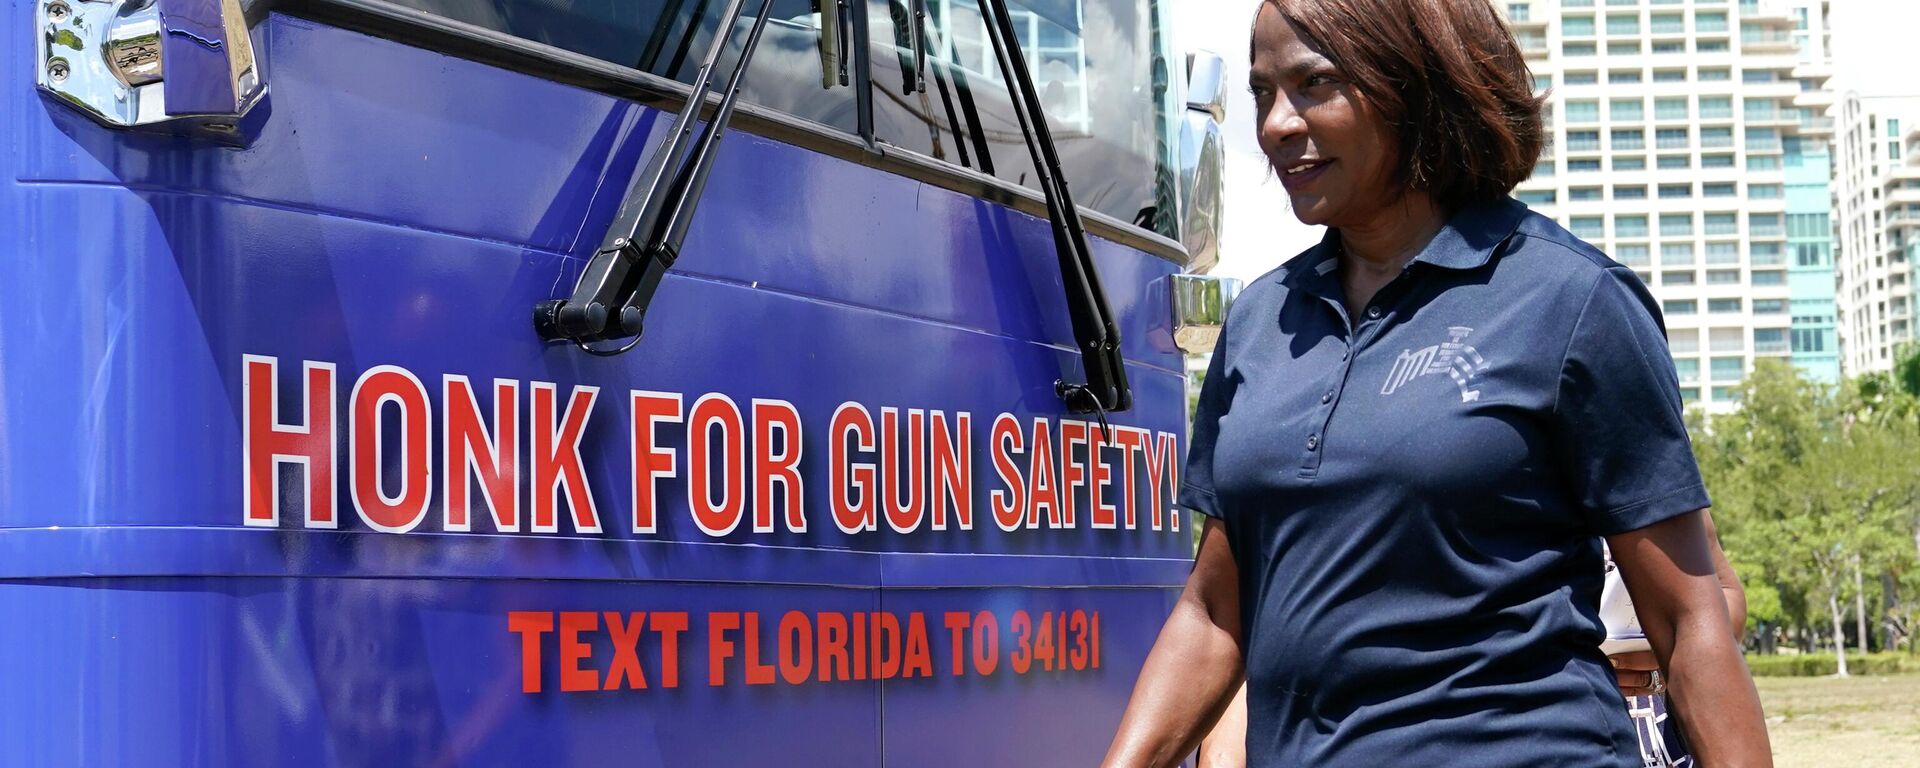 Rep. Val Demings, D-Fla., walks next to a bus at the kick off of the Giffords Florida bus tour, Thursday, Sept. 8, 2022, in Miami - Sputnik International, 1920, 26.09.2022